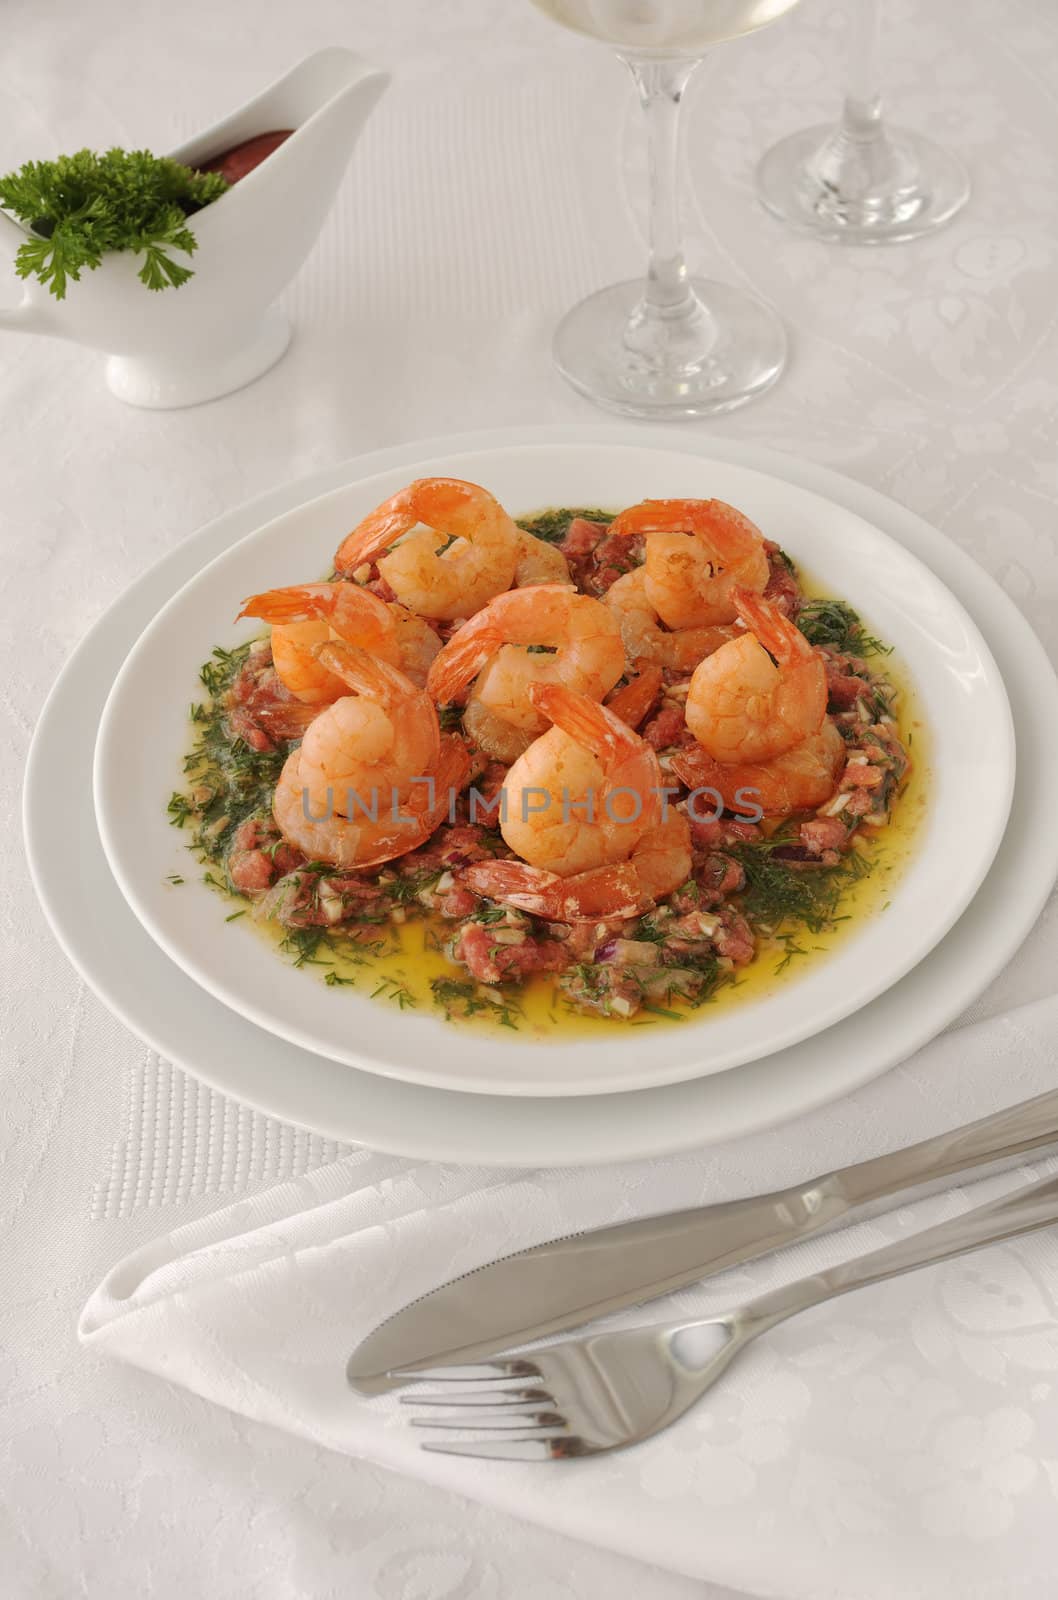 Grilled shrimp with tomatoes, garlic and herbs by Apolonia